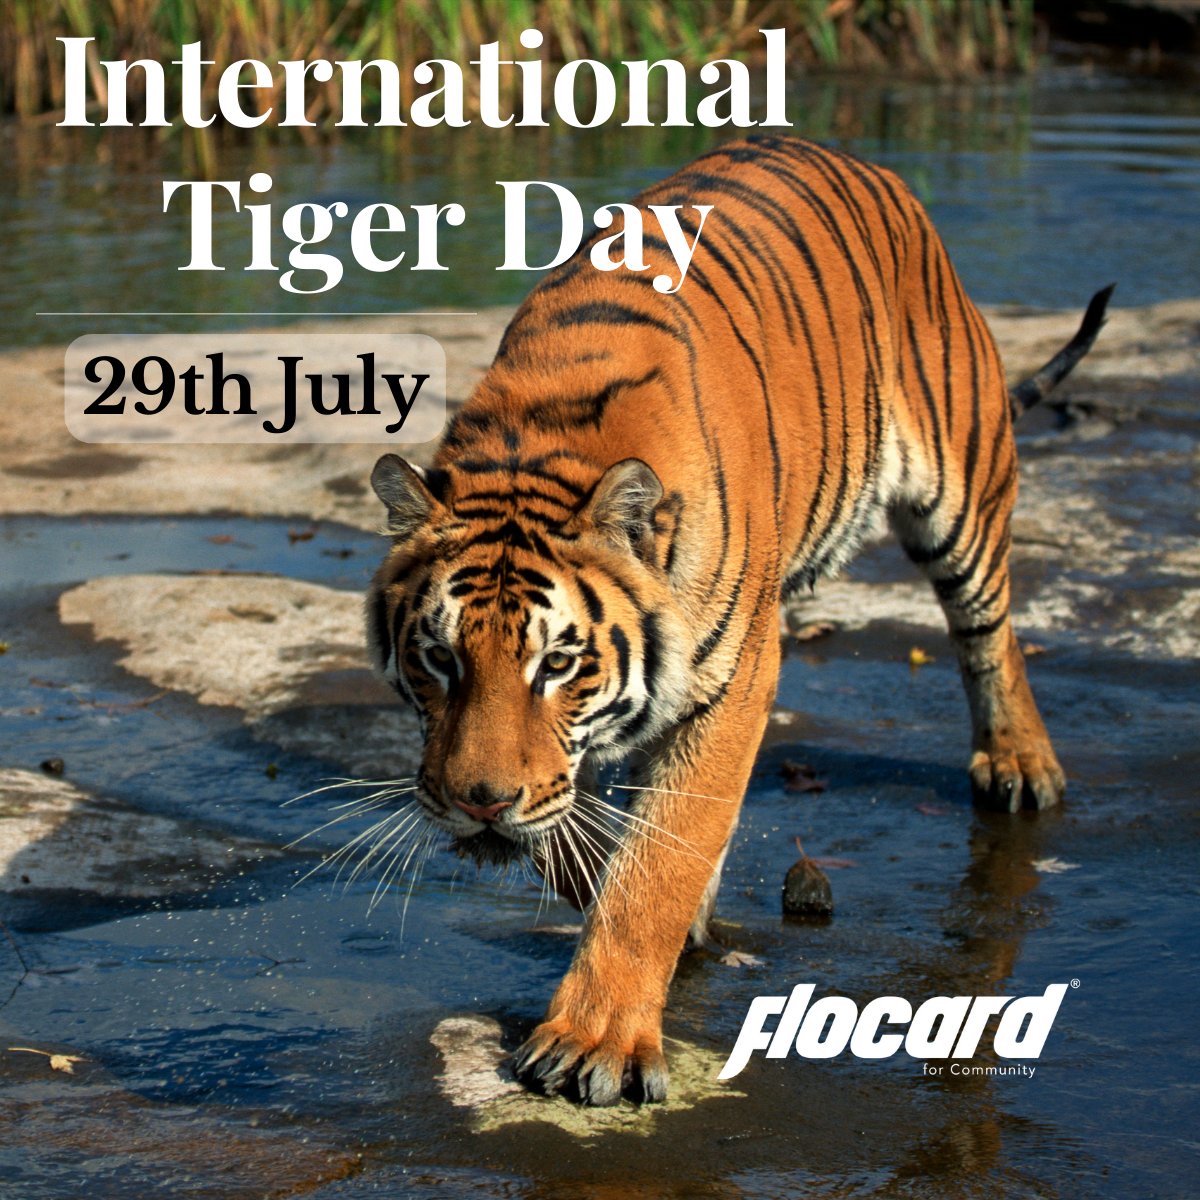 Roaring in sorrow! 🐅On #InternationalTigerDay, let's raise our voices and stand together for the majestic tigers! Let's not forget that we hold the power to protect and restore their habitats.

#ChangeSoonItsMonsoon #WorldNatureConservationDay #Beast #YouAreTheLight